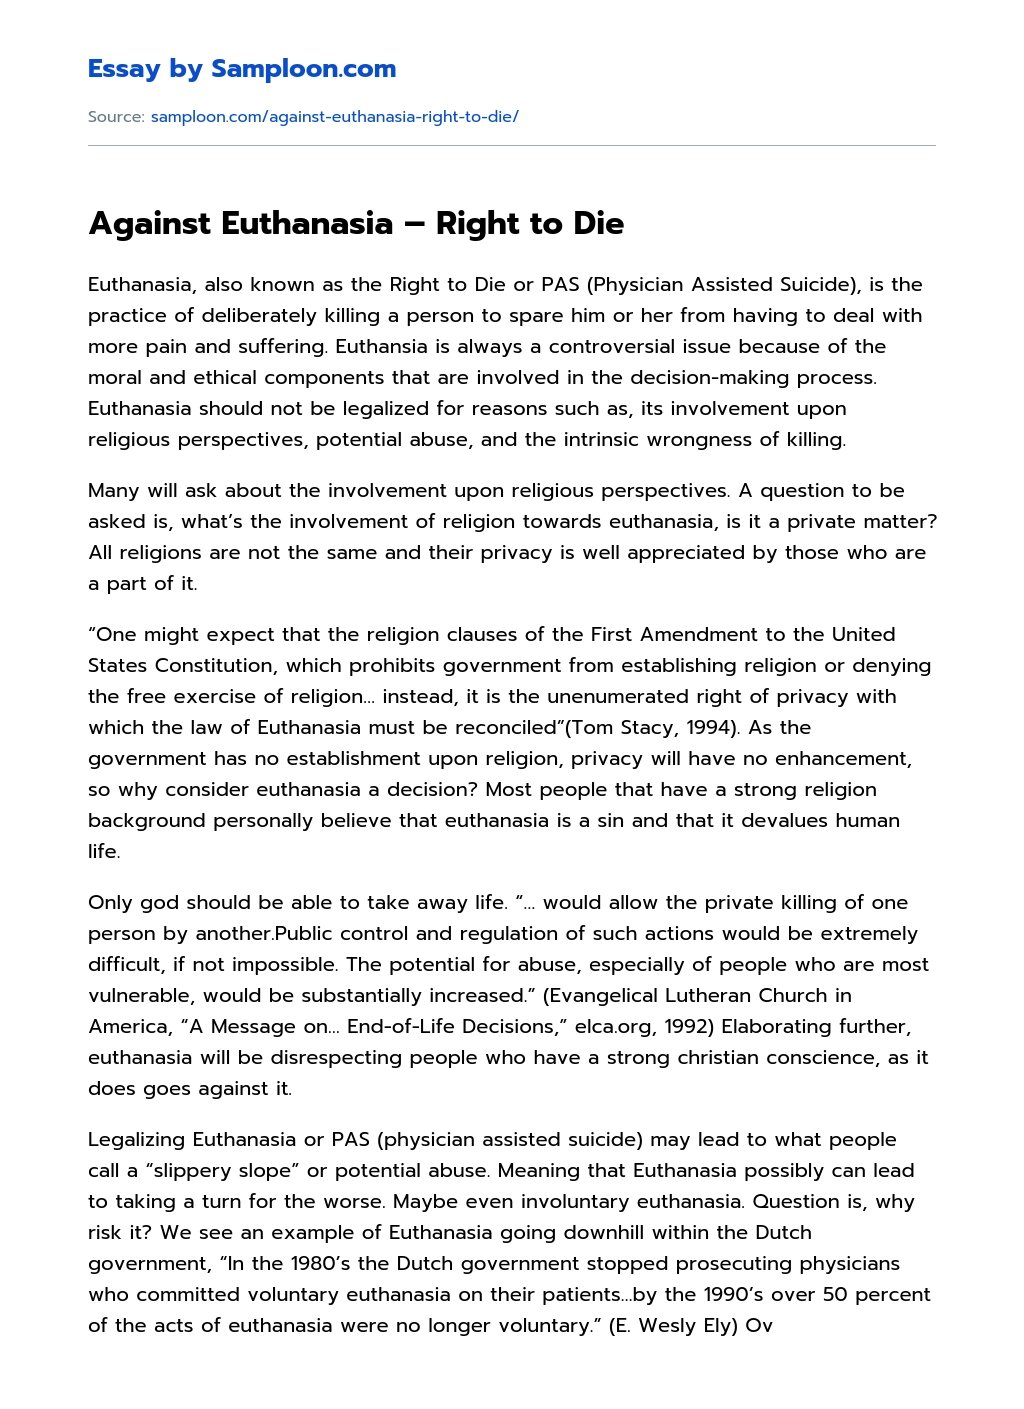 euthanasia is never right essay